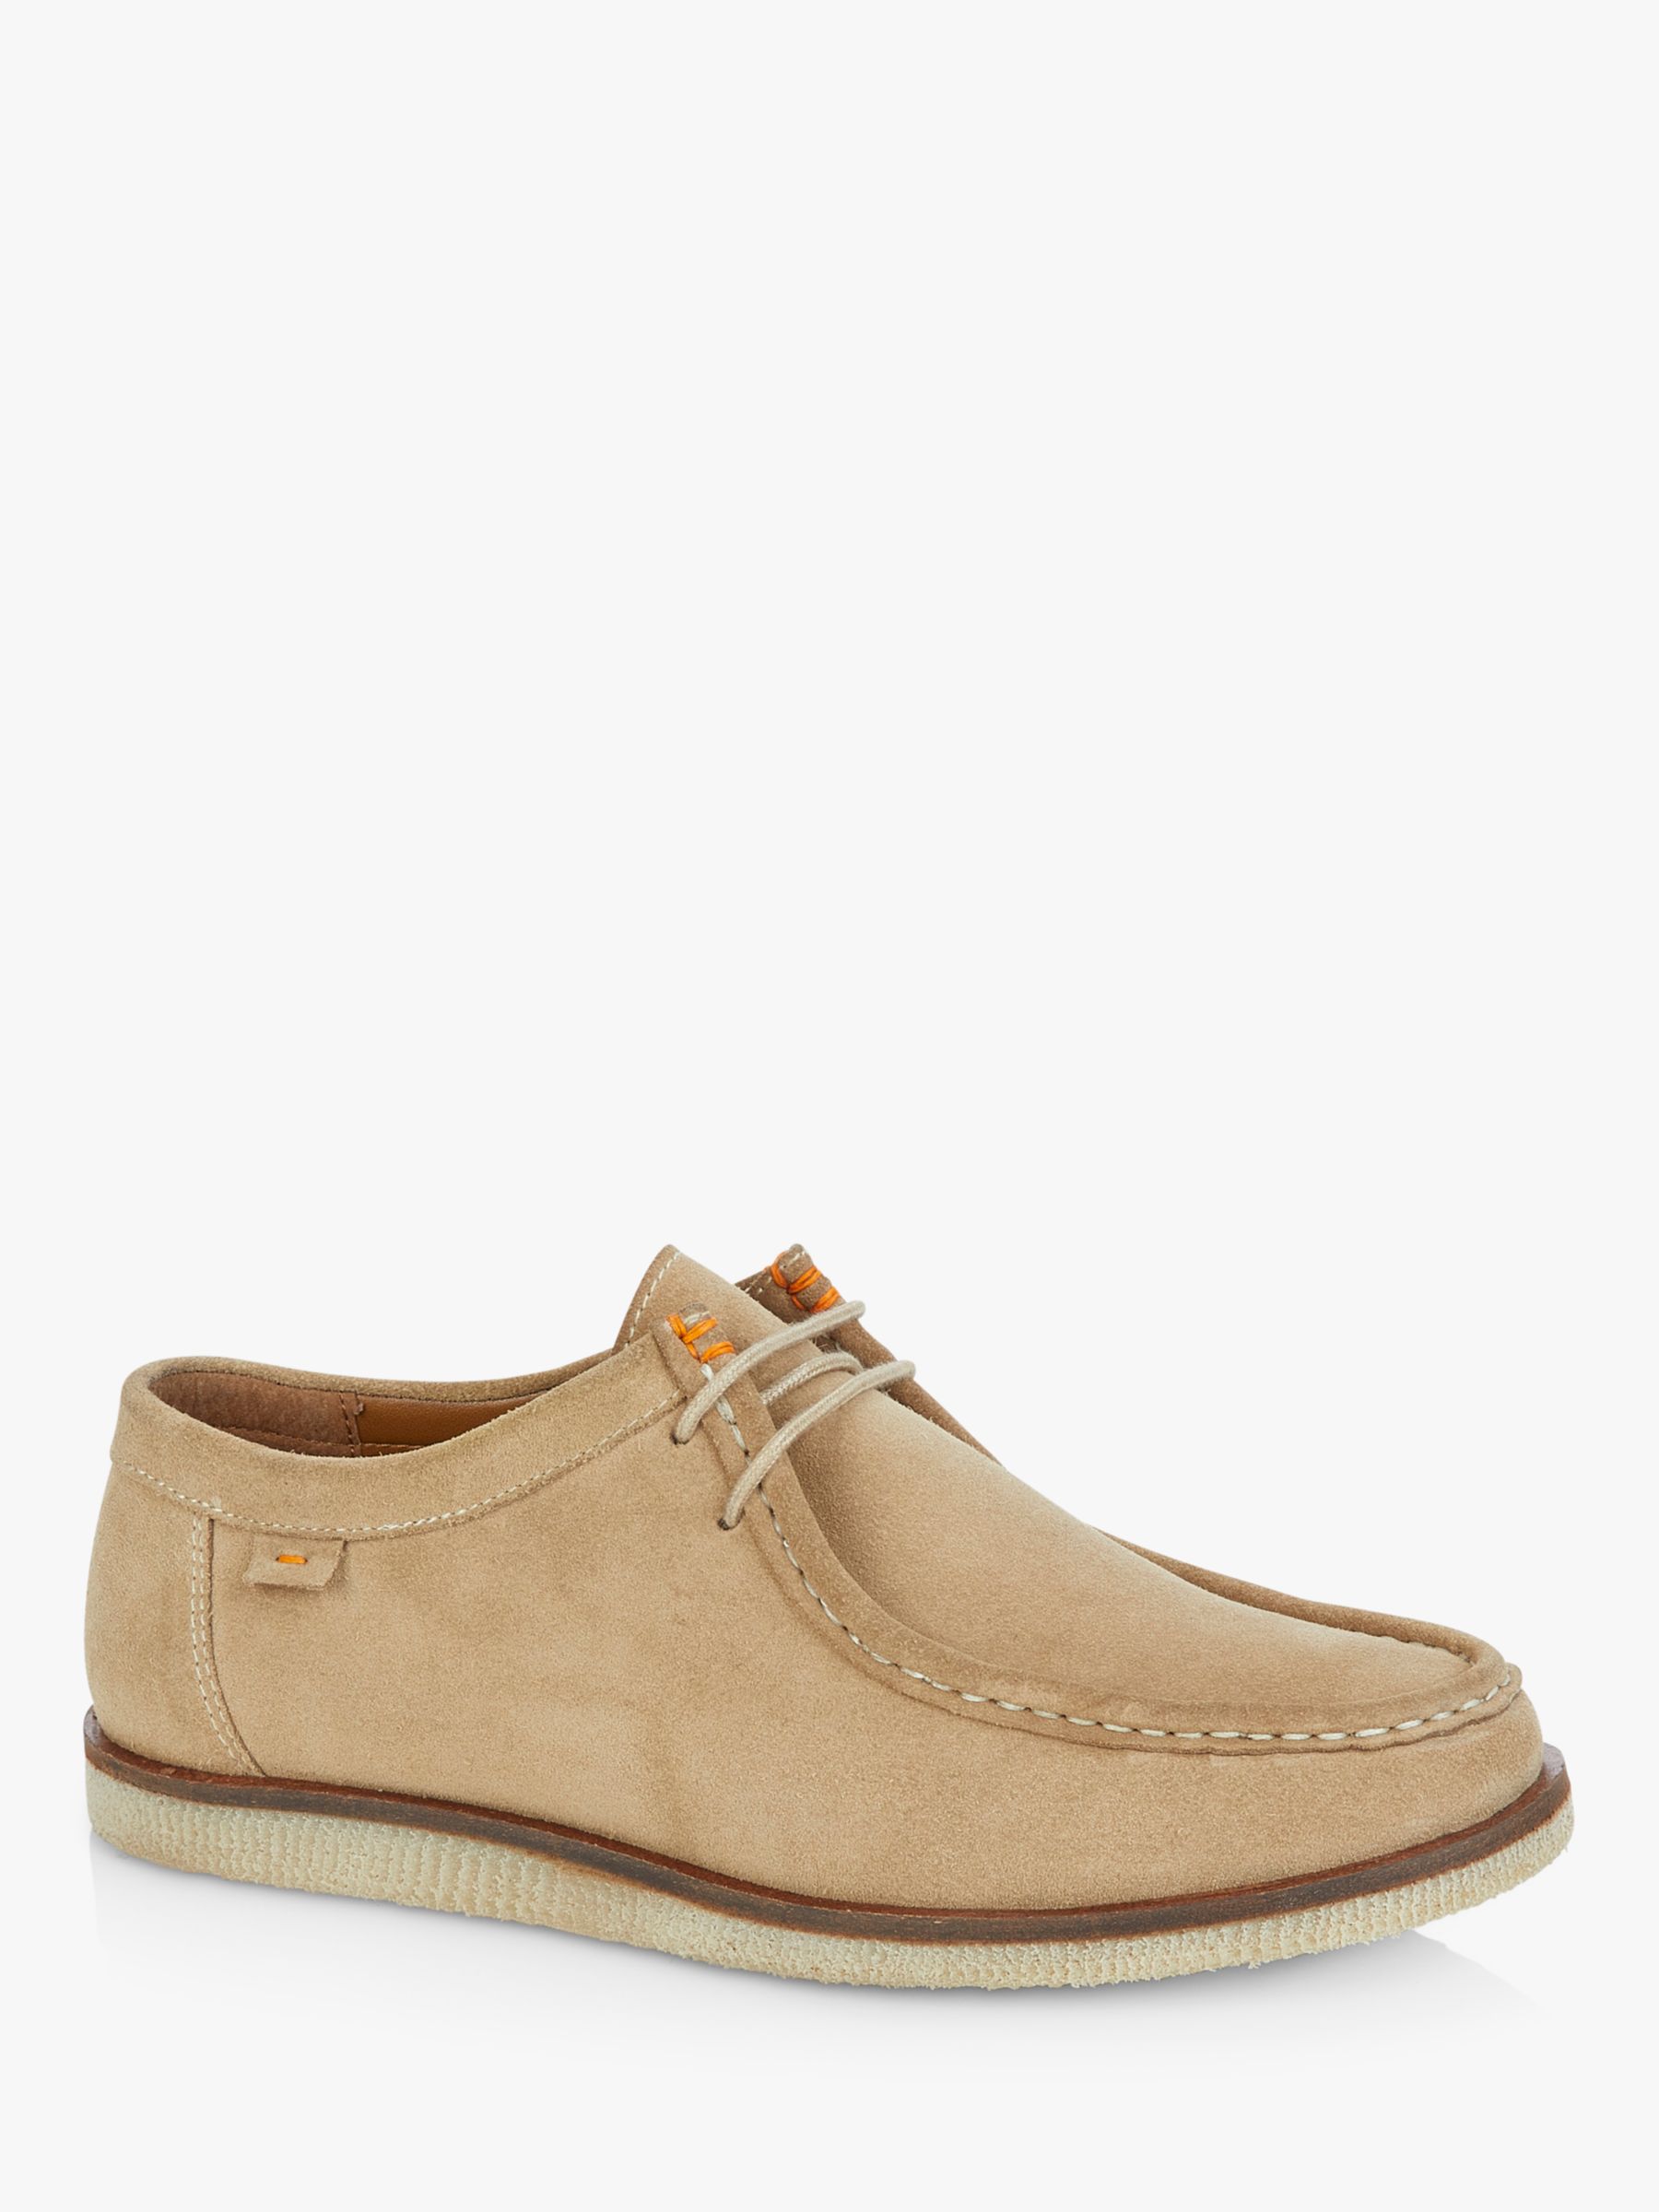 Silver Street London Sydney Suede Moccasin Boots, Sand at John Lewis ...